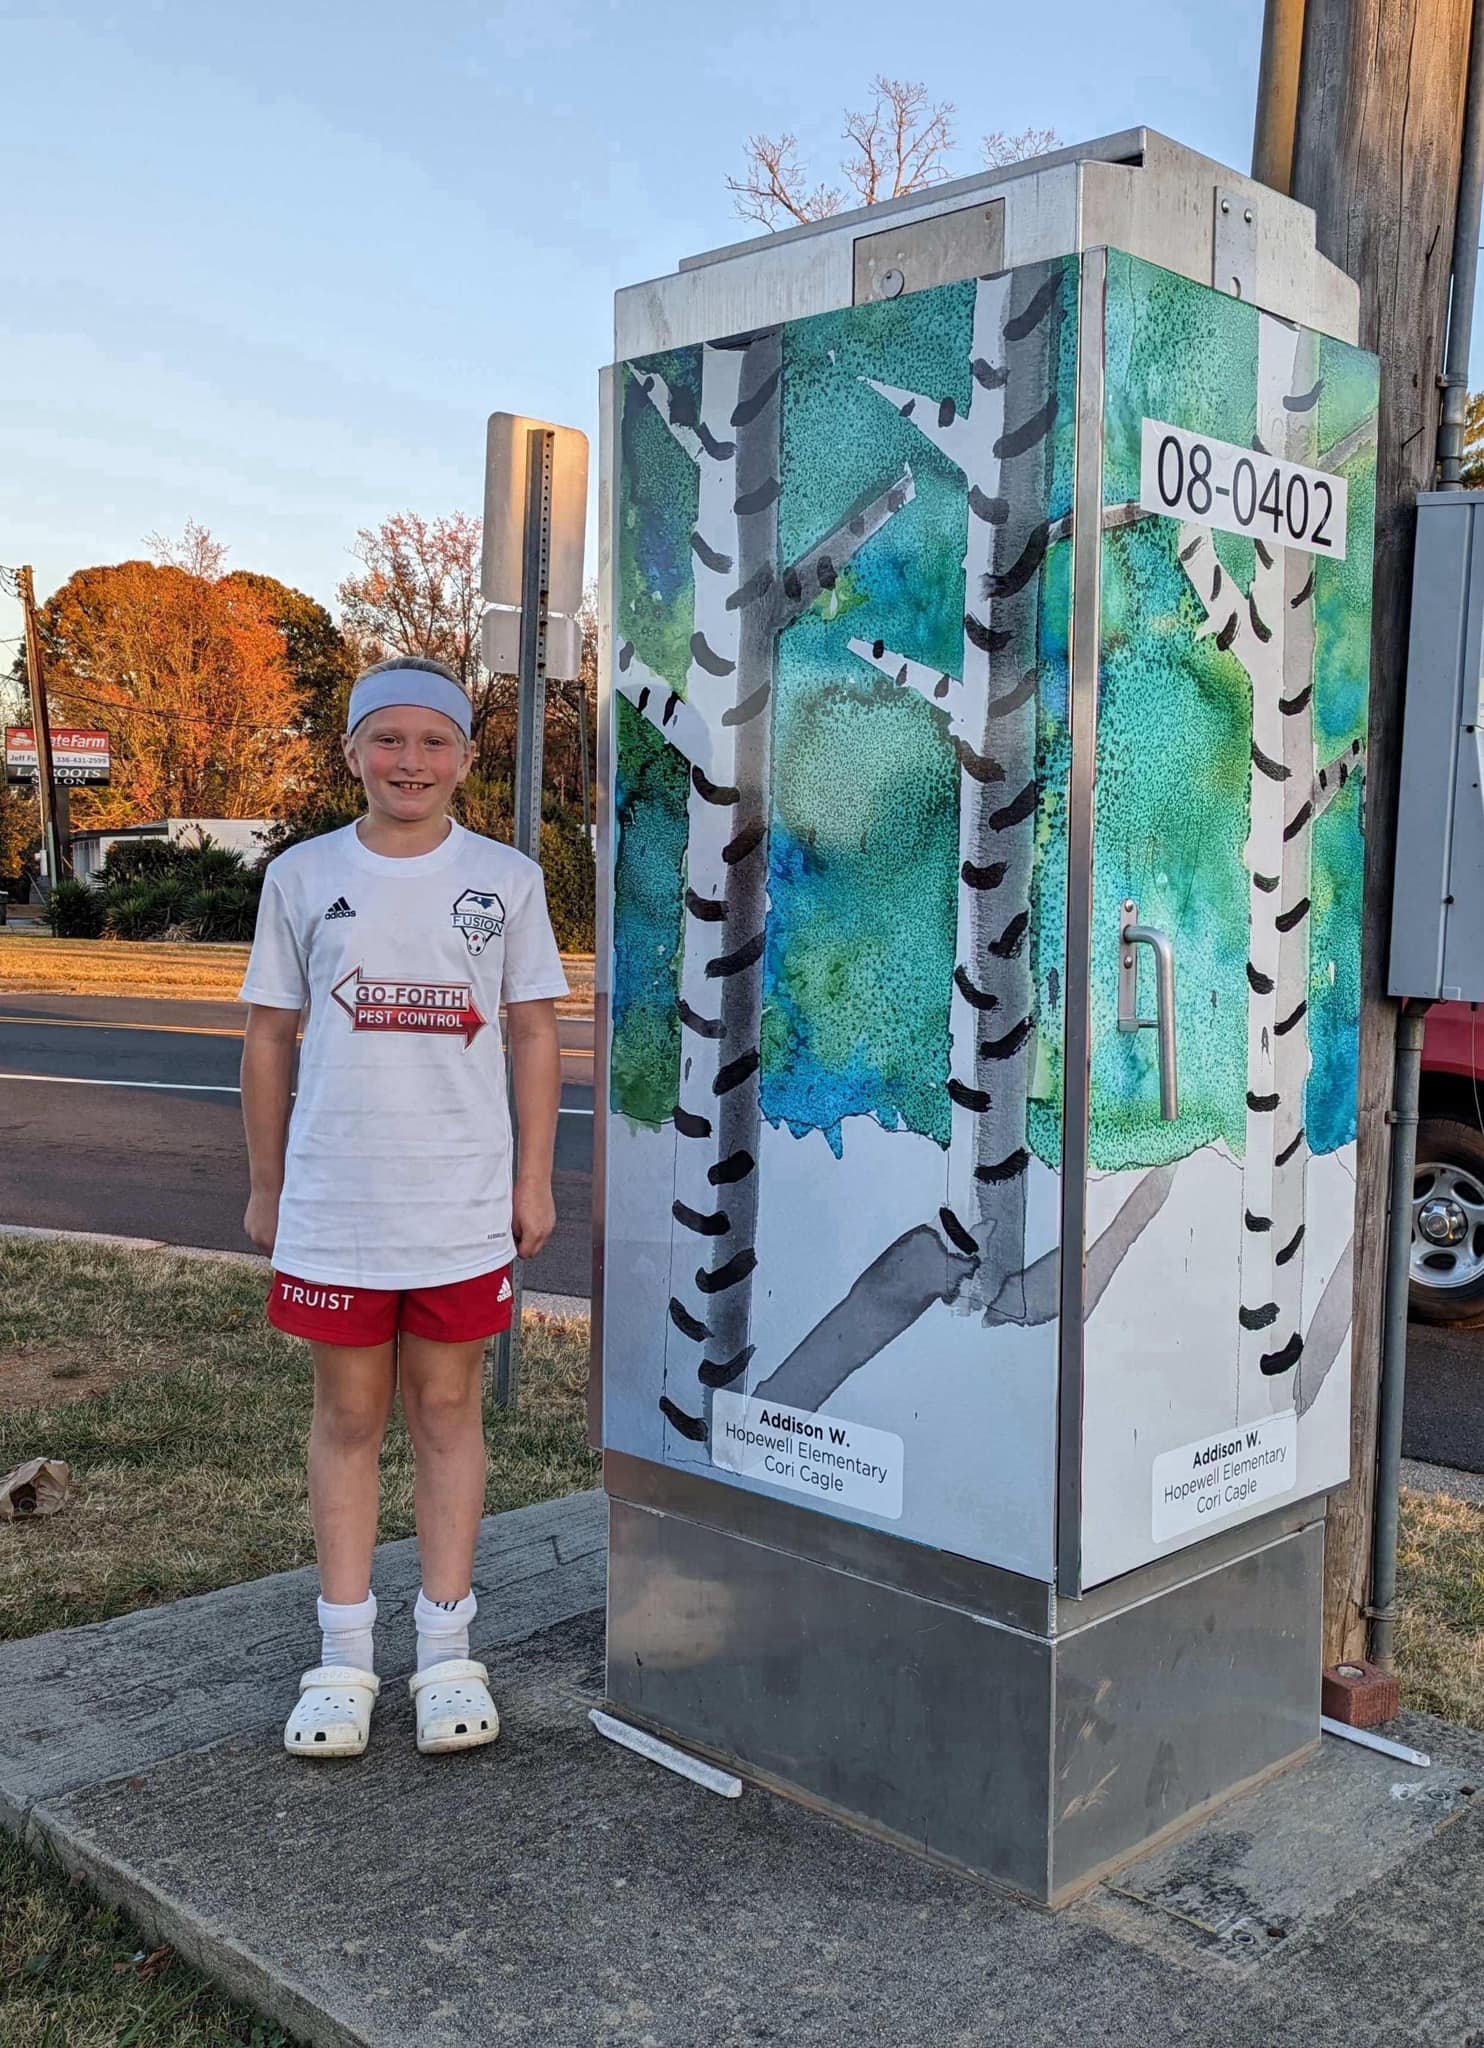 Hopewell Elementary School - vibrant student artwork on the local traffic boxes